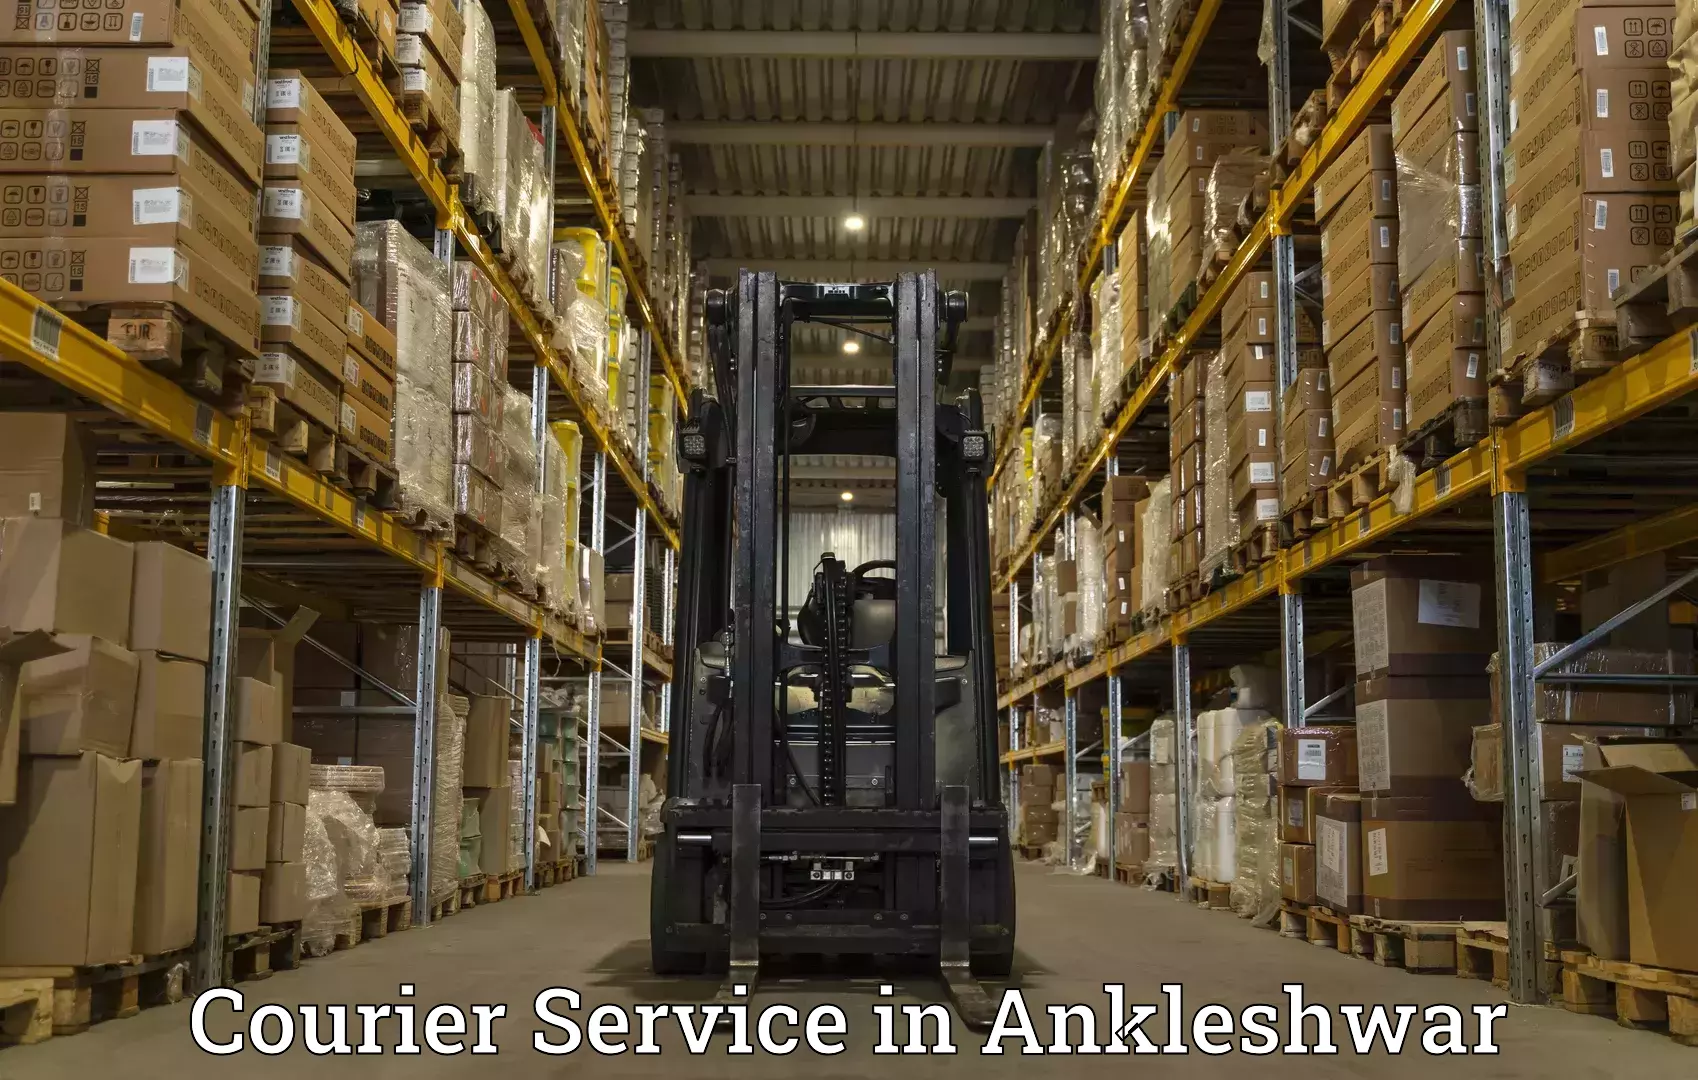 Nationwide courier service in Ankleshwar